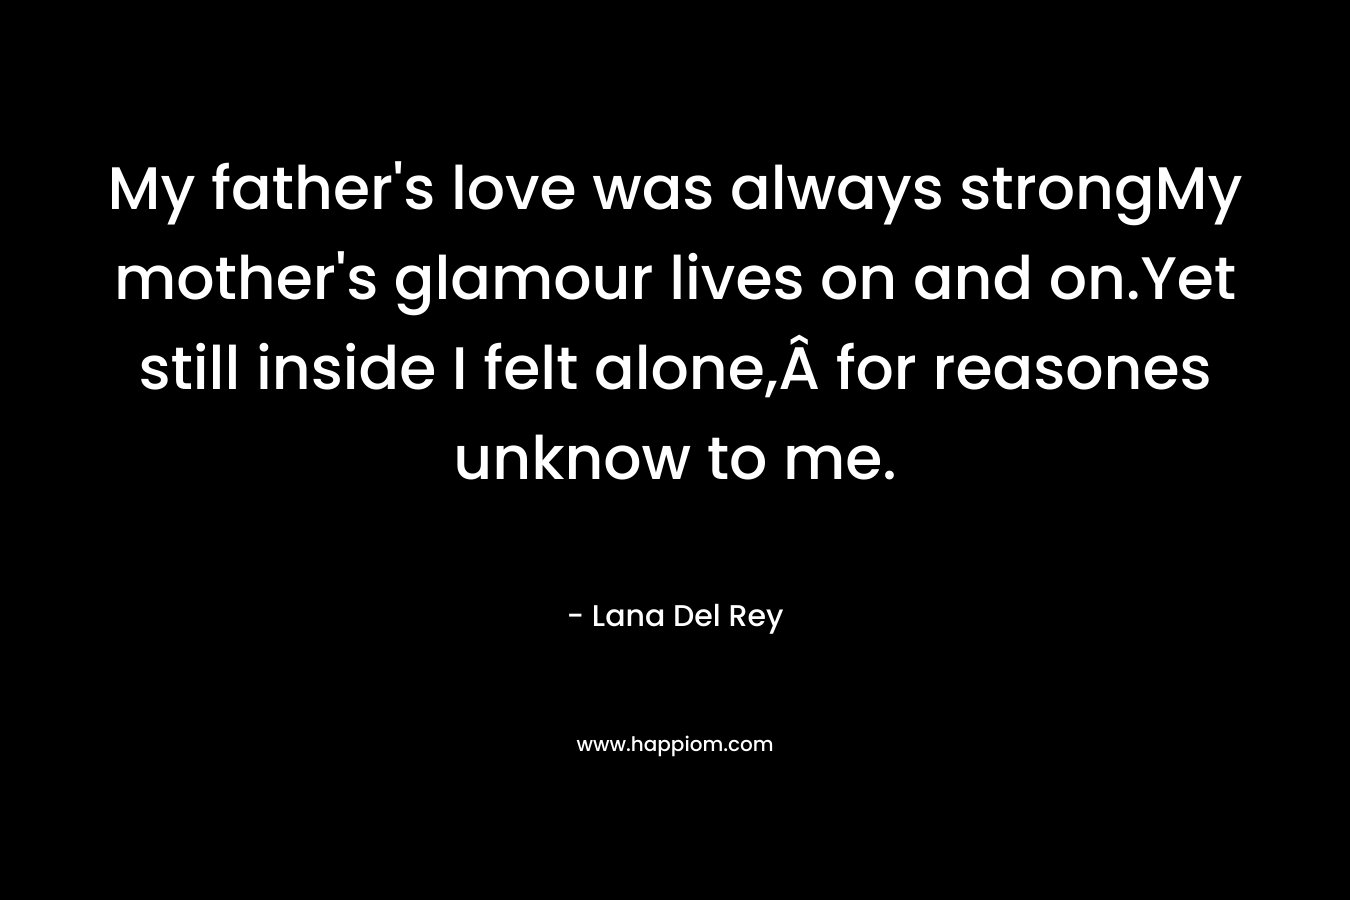 My father’s love was always strongMy mother’s glamour lives on and on.Yet still inside I felt alone,Â for reasones unknow to me. – Lana Del Rey